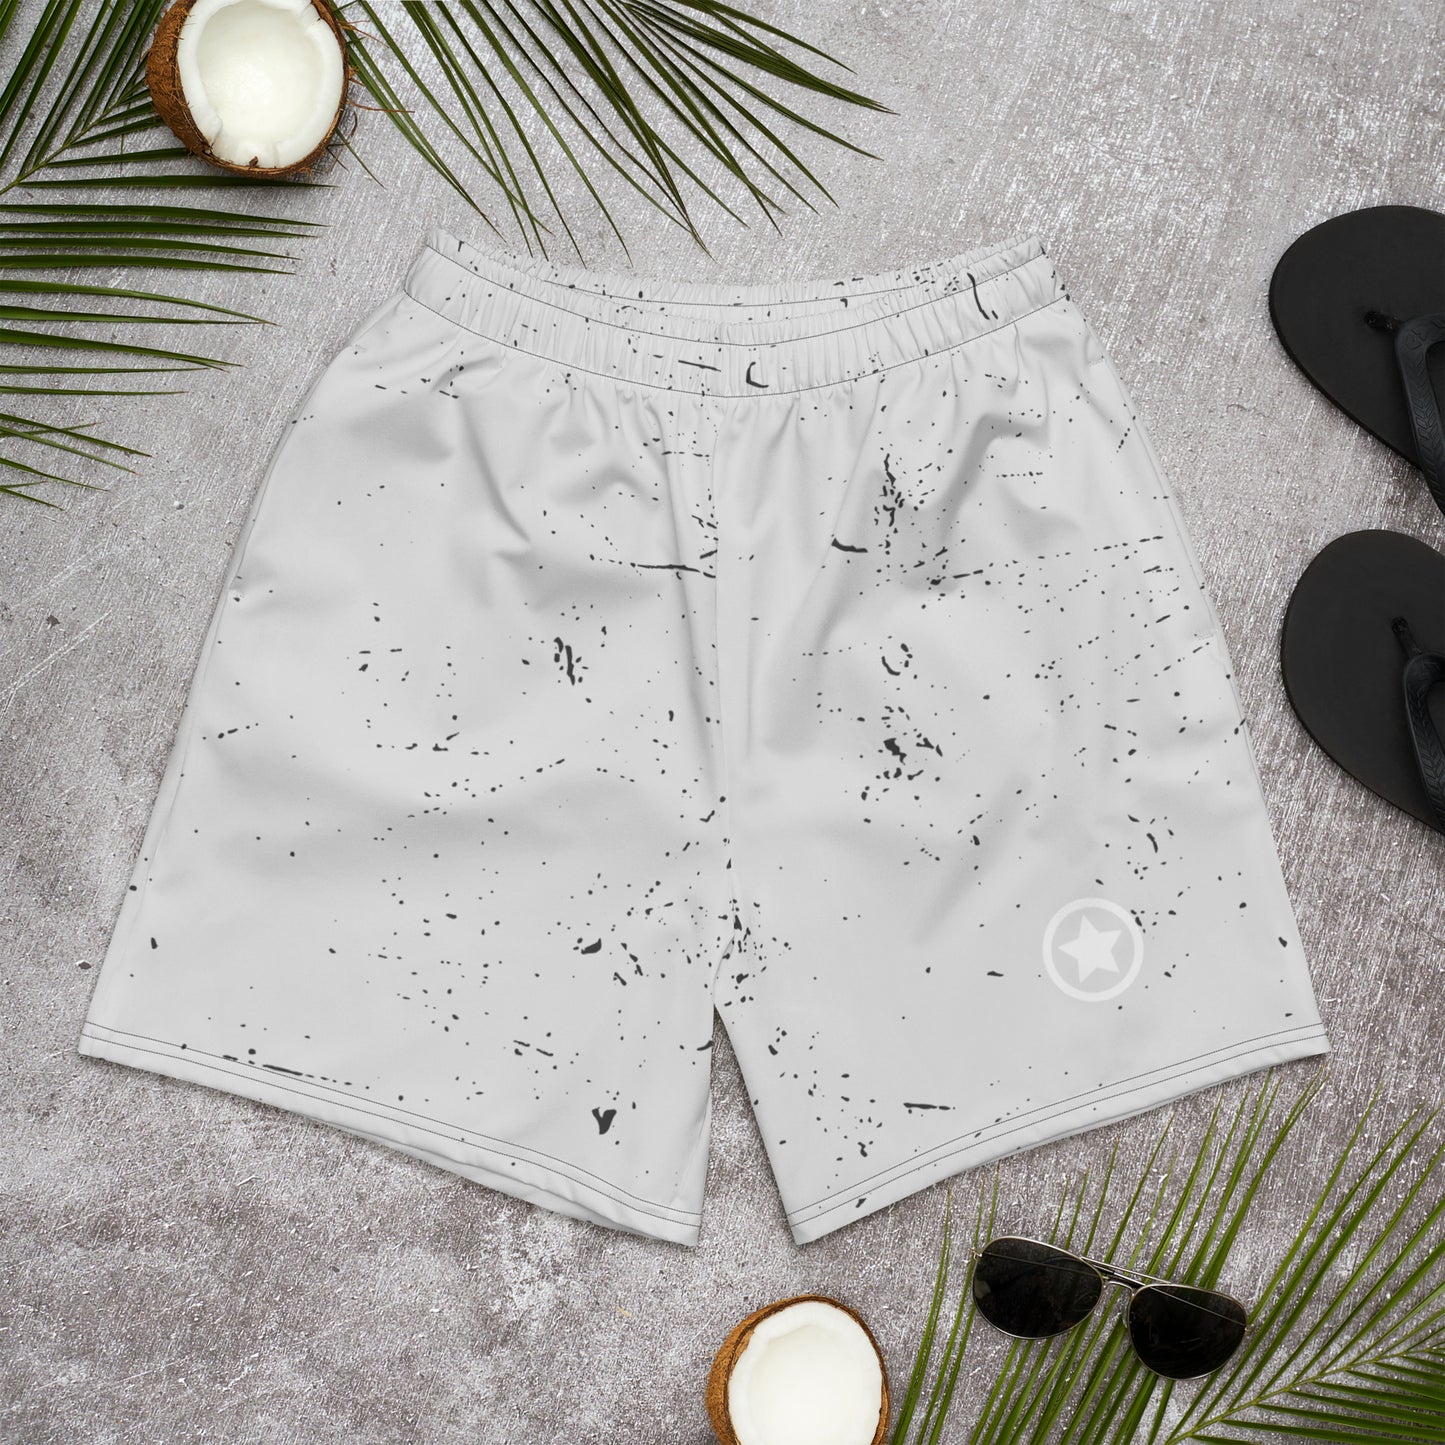 Mens LuxeStride Grey Spatter Shorts